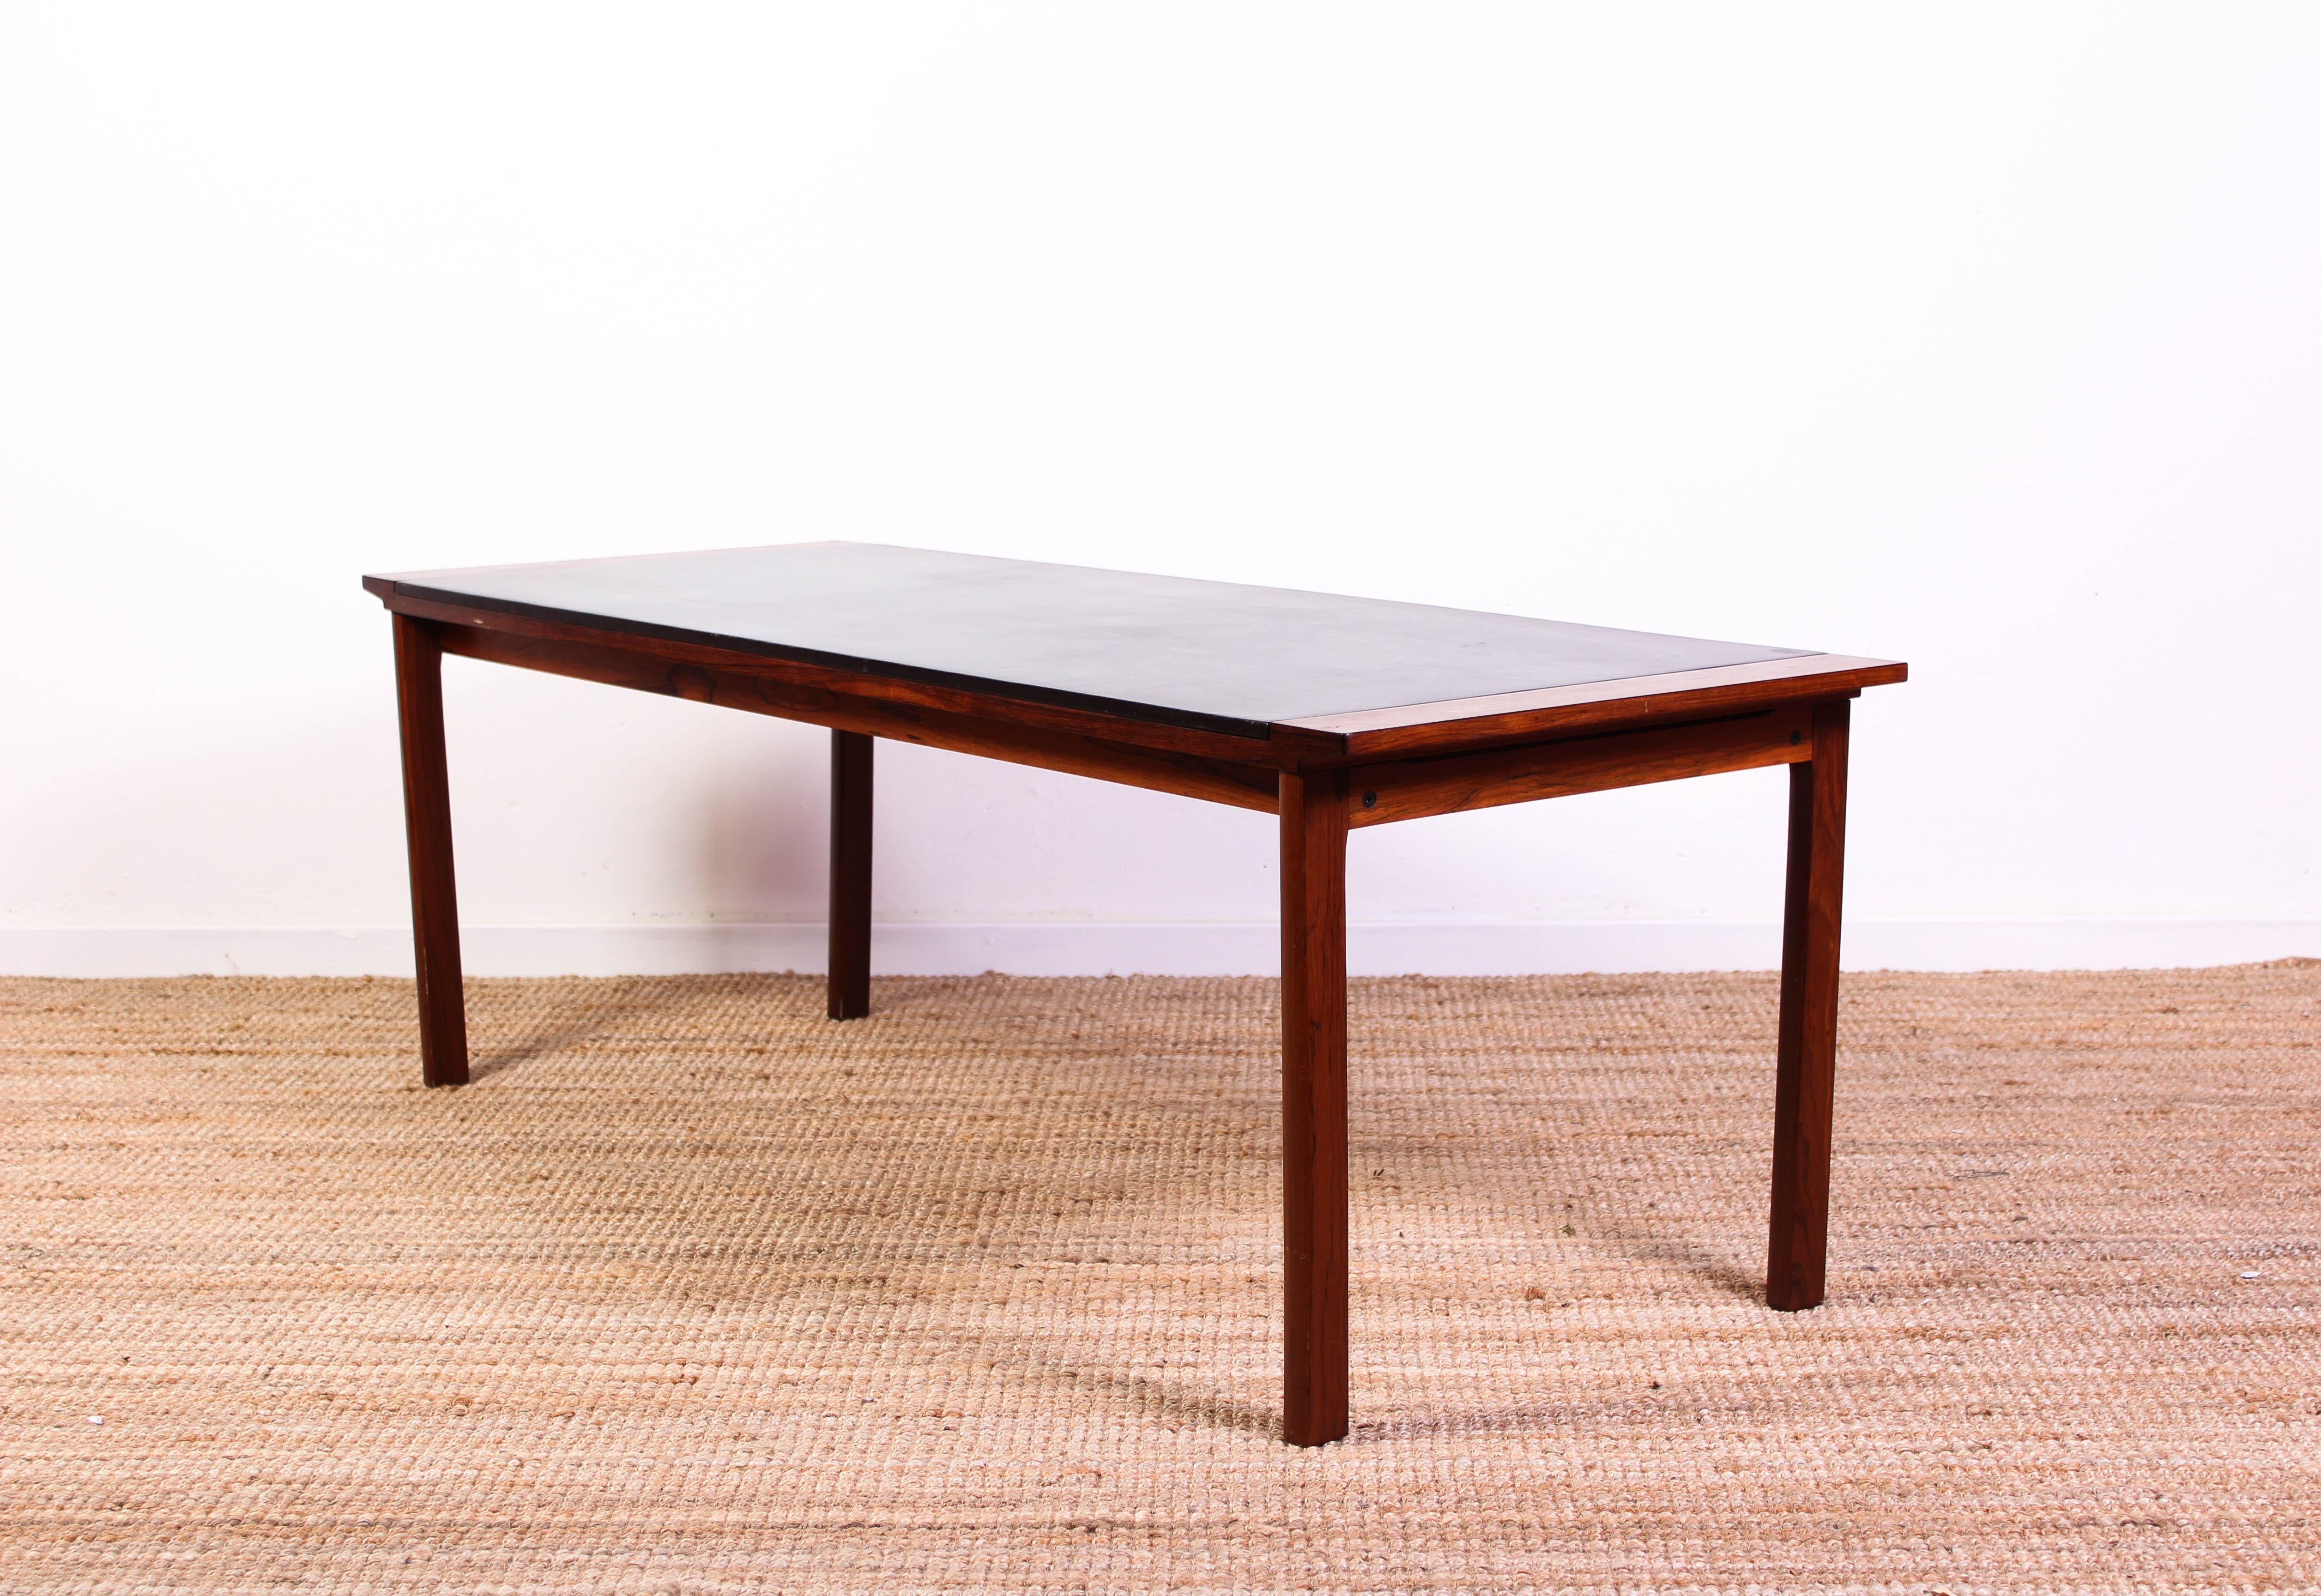 Midcentury Danish Rosewood Coffee Table with Leather Top In Good Condition For Sale In Malmo, SE